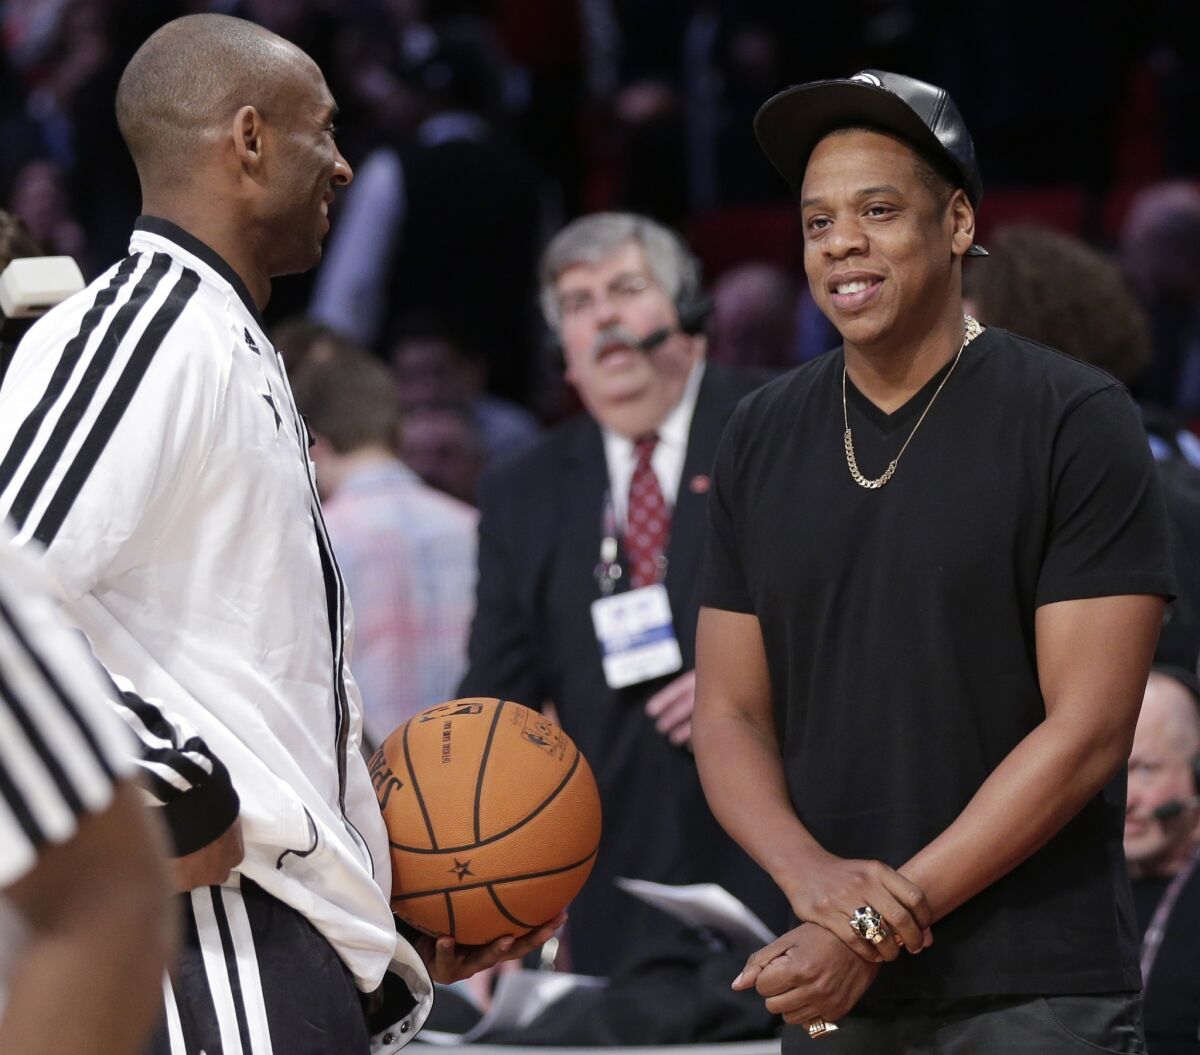 Kobe Bryant and Jay Z before an NBA All-Star game.